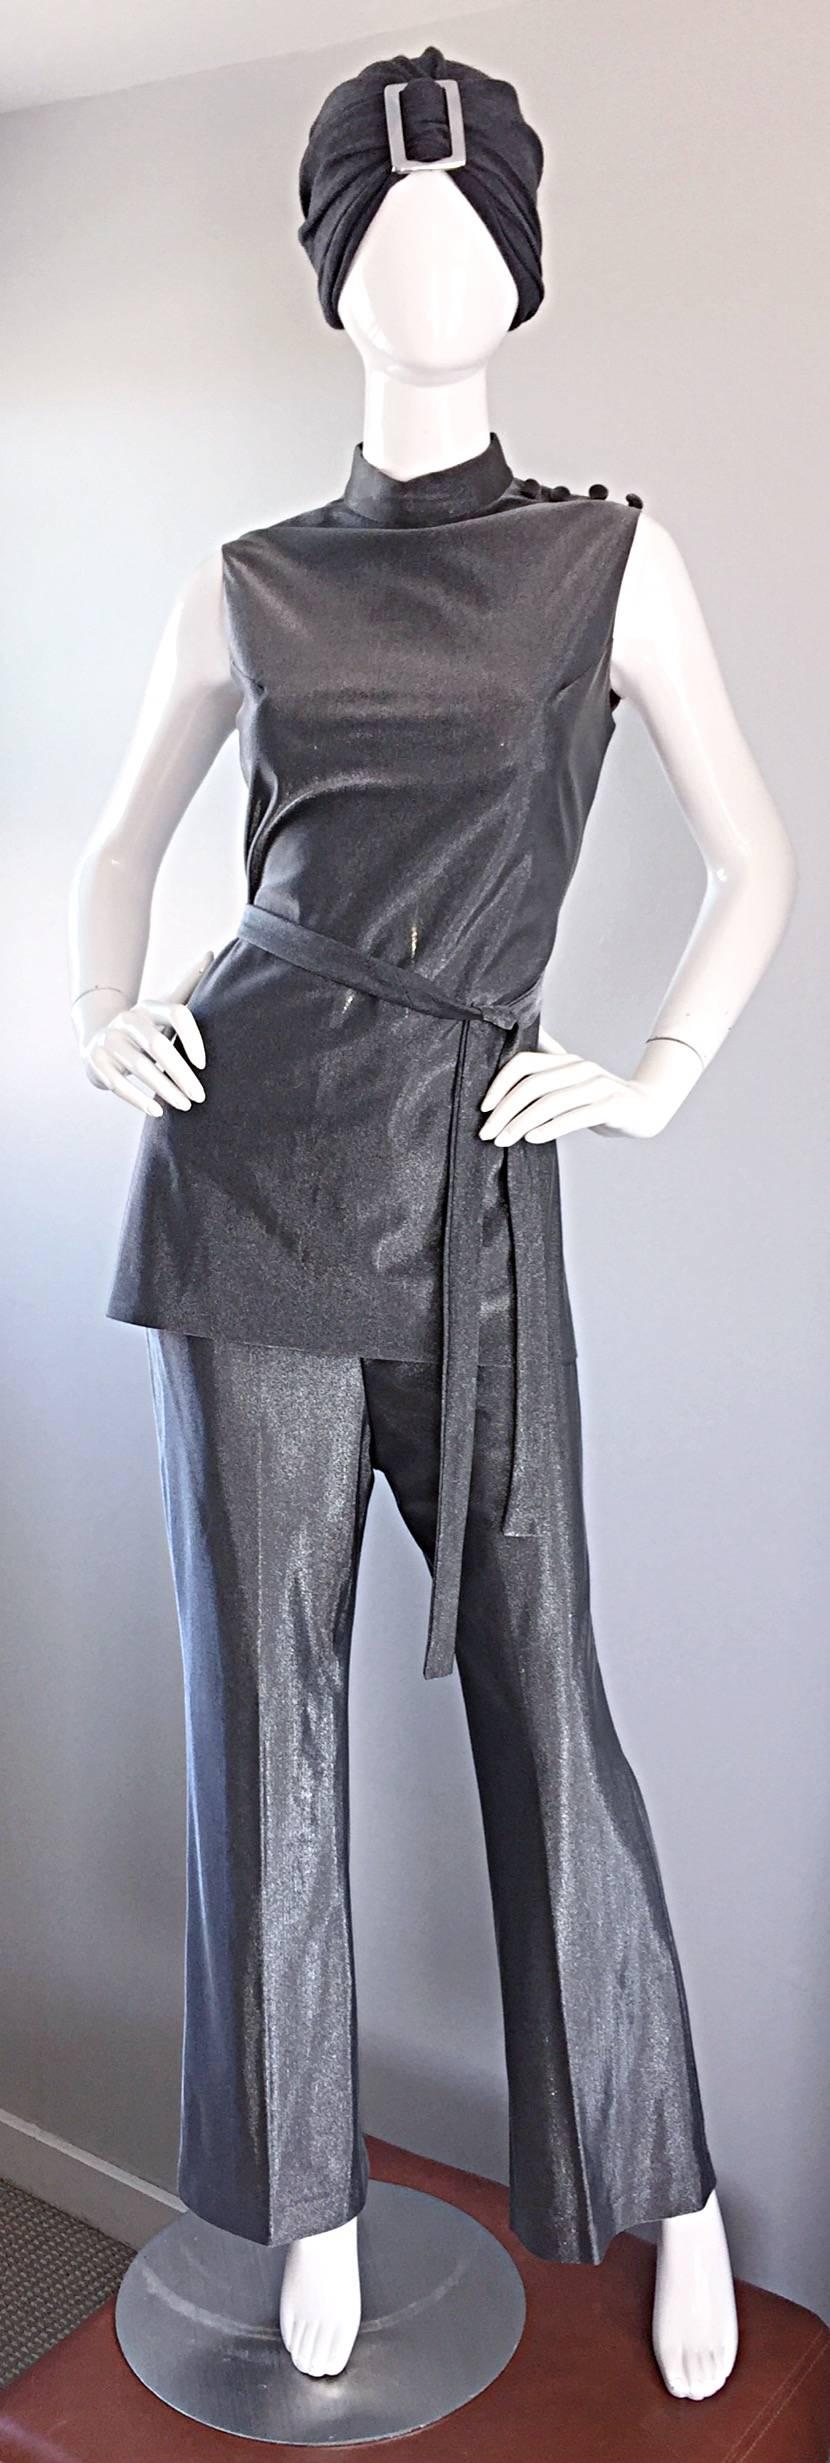 Exceptional vintage 1970s three piece metallic gunmetal / grey ensemble! Features a fitted tunic top with mock fabric covered buttons at top left shoulder. Metal zipper up the back with hook-and-eye closure. Matching detachable belt (also works as a